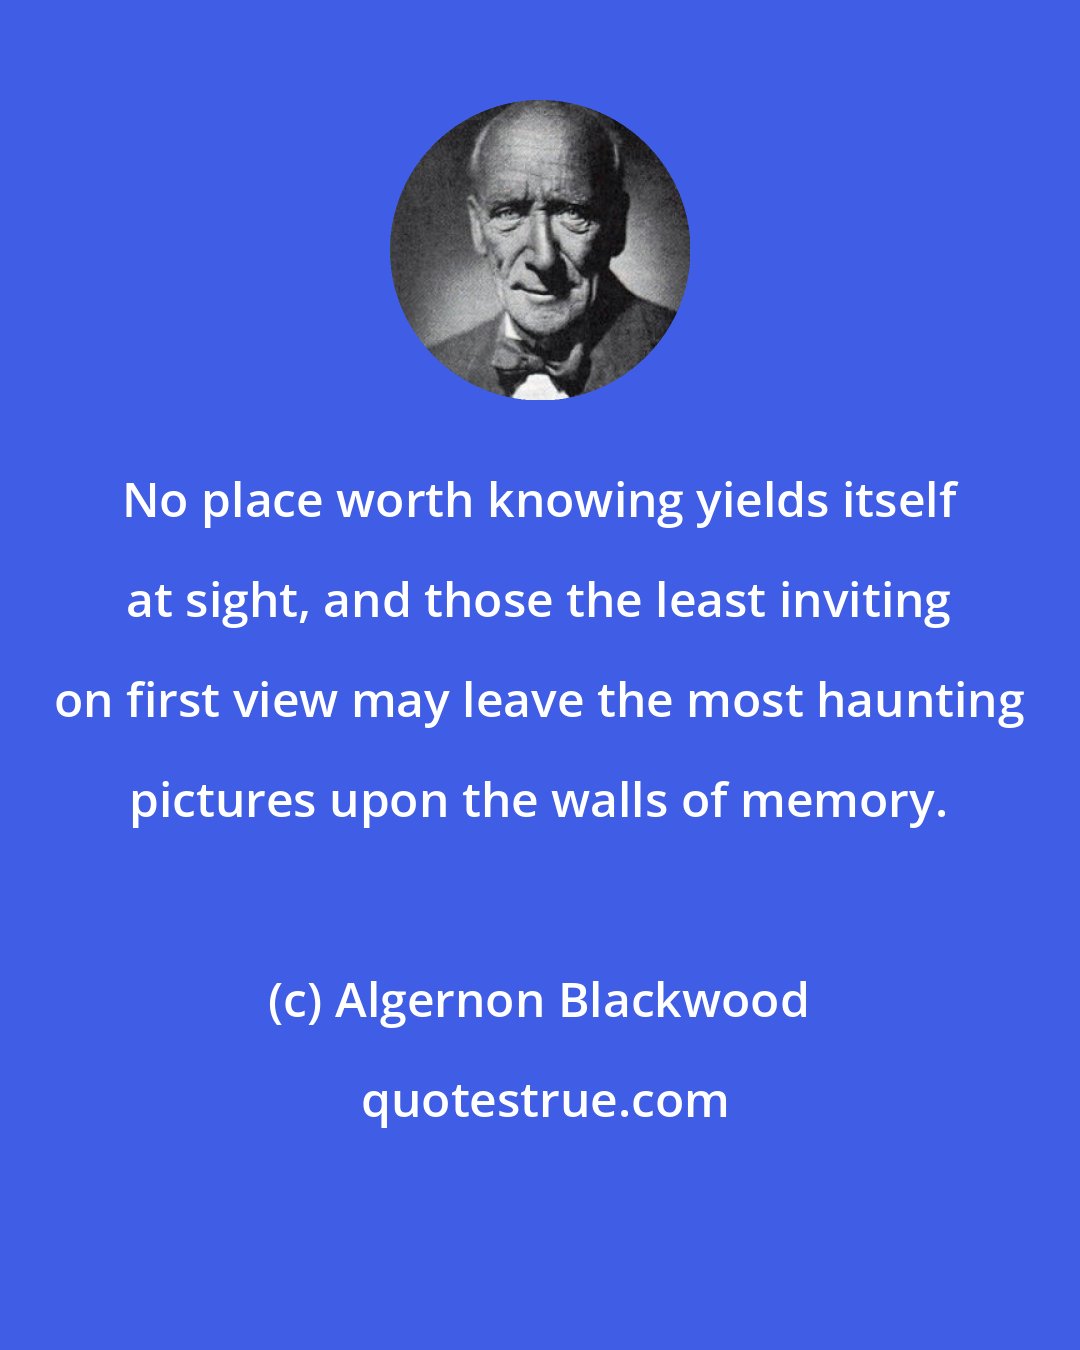 Algernon Blackwood: No place worth knowing yields itself at sight, and those the least inviting on first view may leave the most haunting pictures upon the walls of memory.